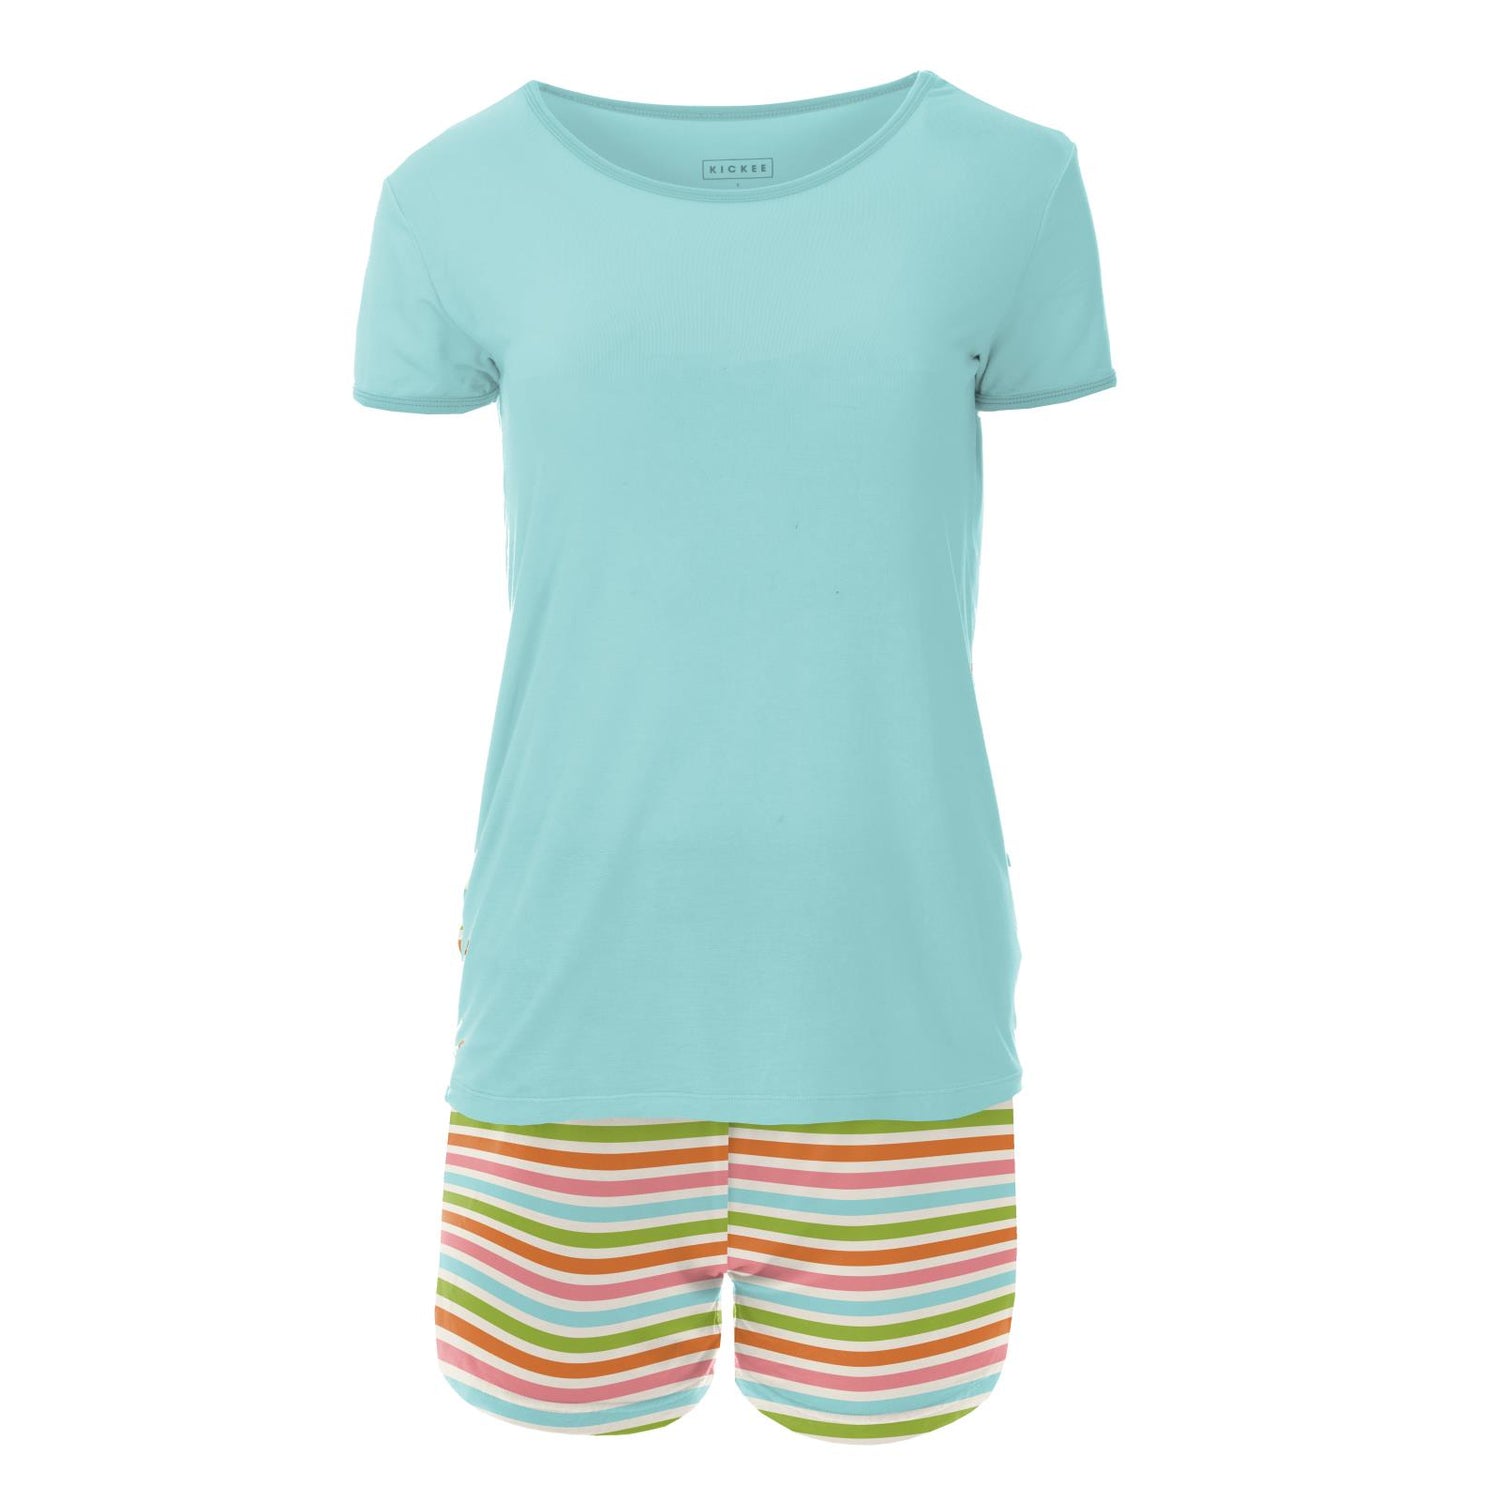 Women's Print Short Sleeve Fitted Pajama Set with Shorts in Beach Day Stripe